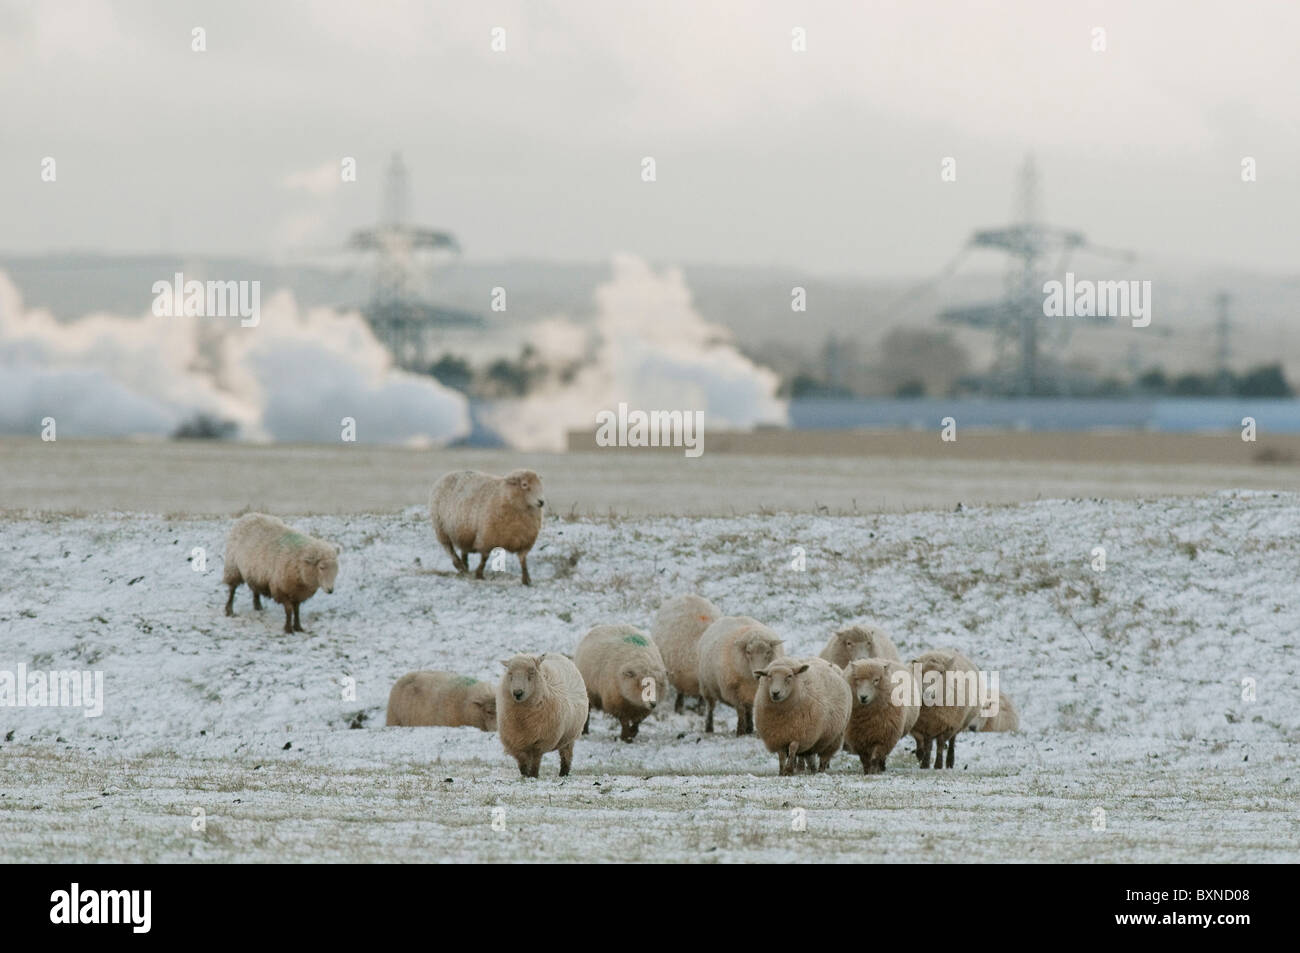 Domestic Sheep (Ovis ammon aries). Romney Sheep walking in snow with industry in background, Elmley Marshes. Stock Photo